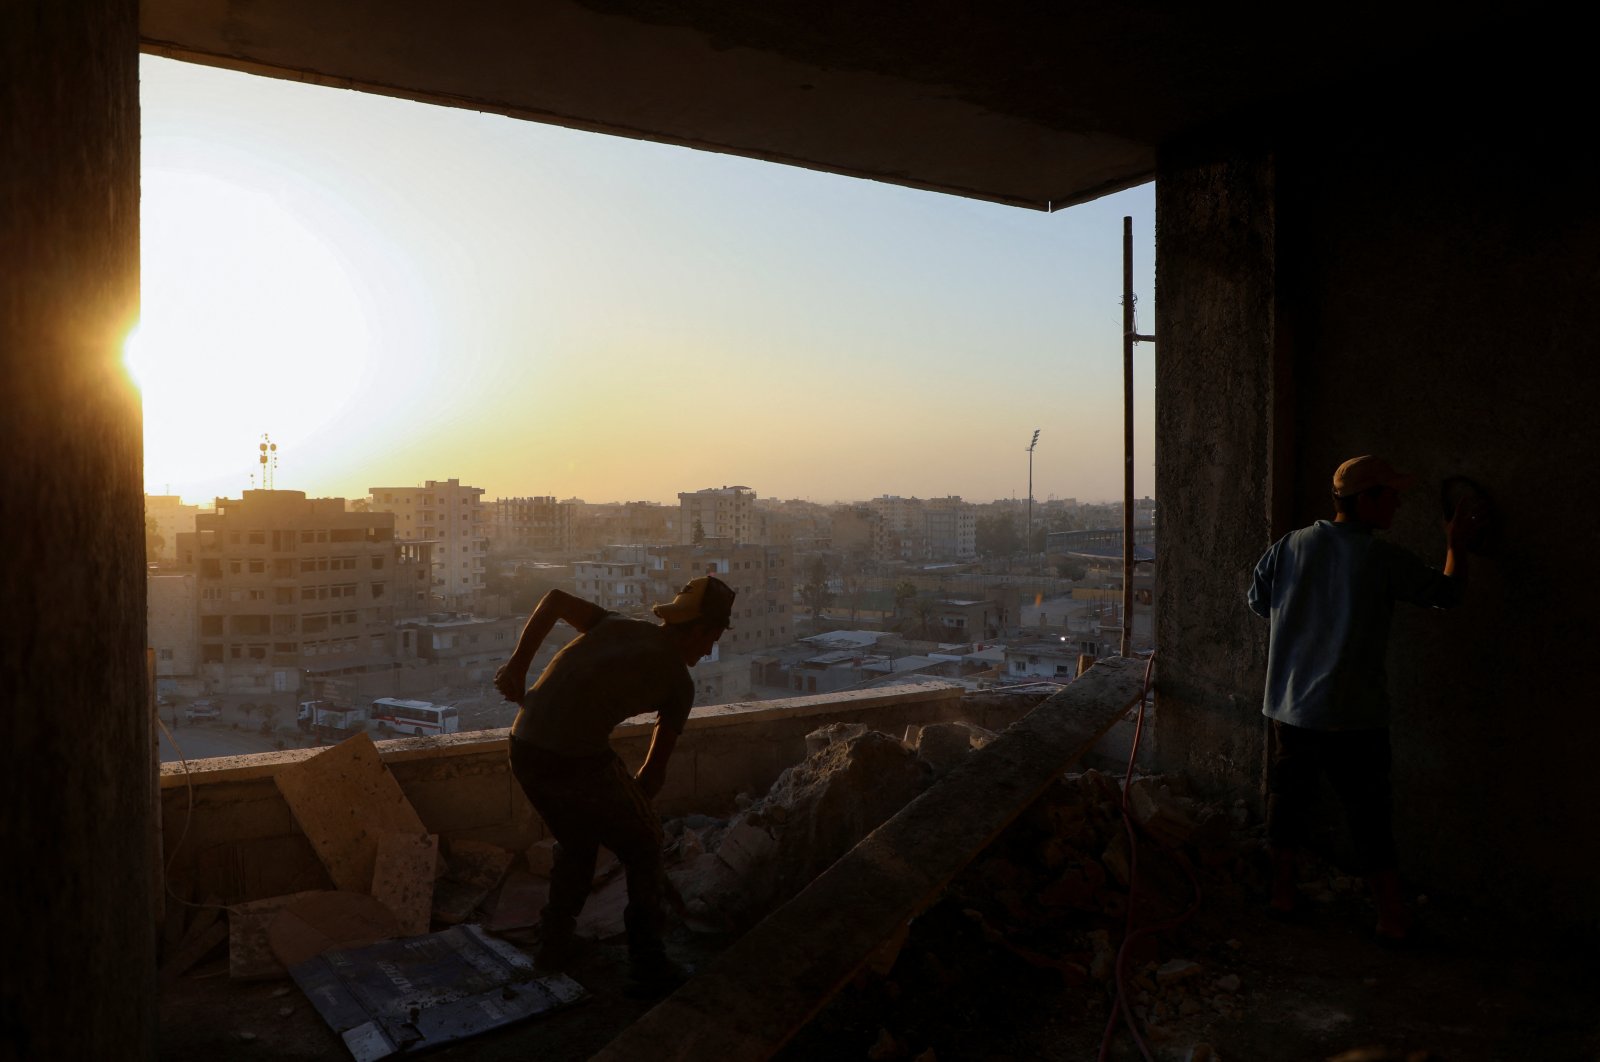 Construction workers labor inside a building in Raqqa, Syria, Oct. 13, 2022. (REUTERS Photo)